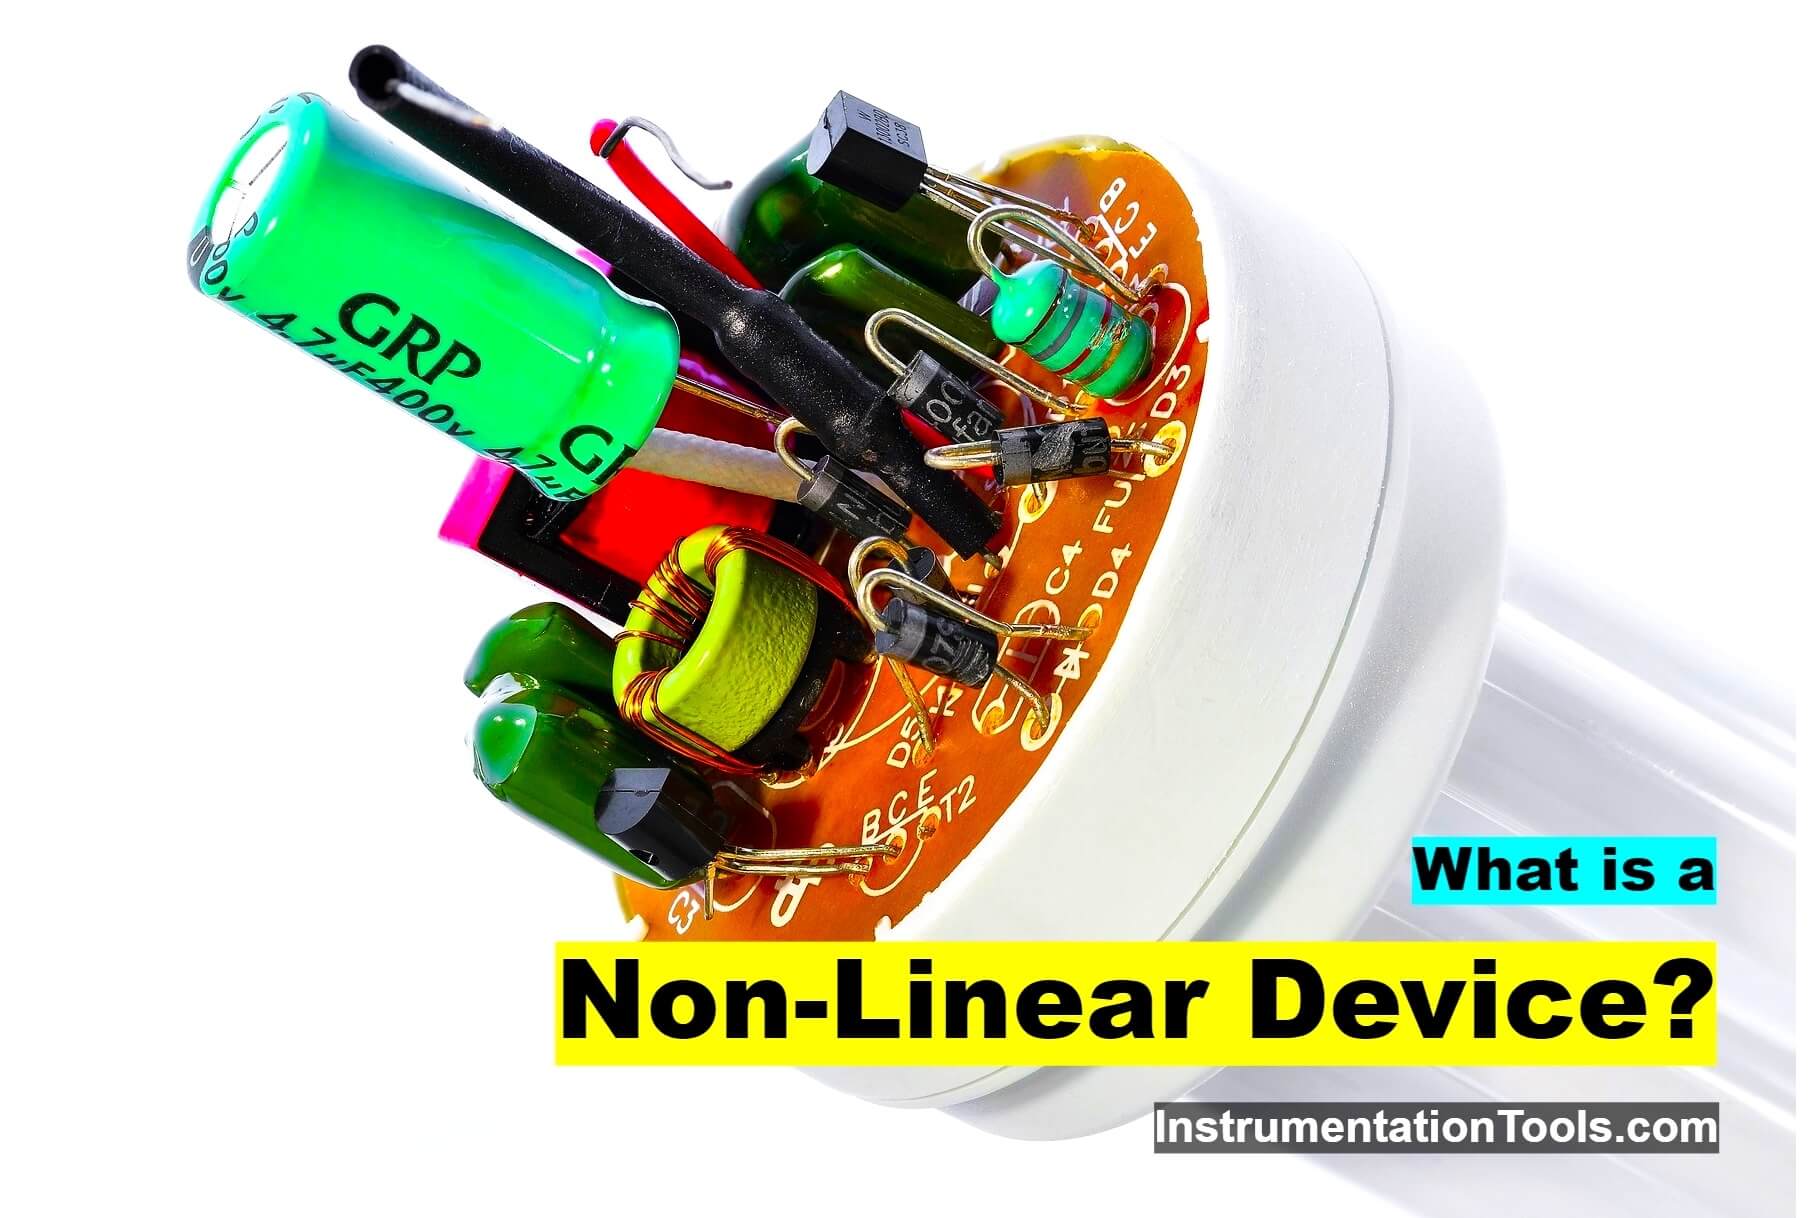 What is a Non-Linear Device